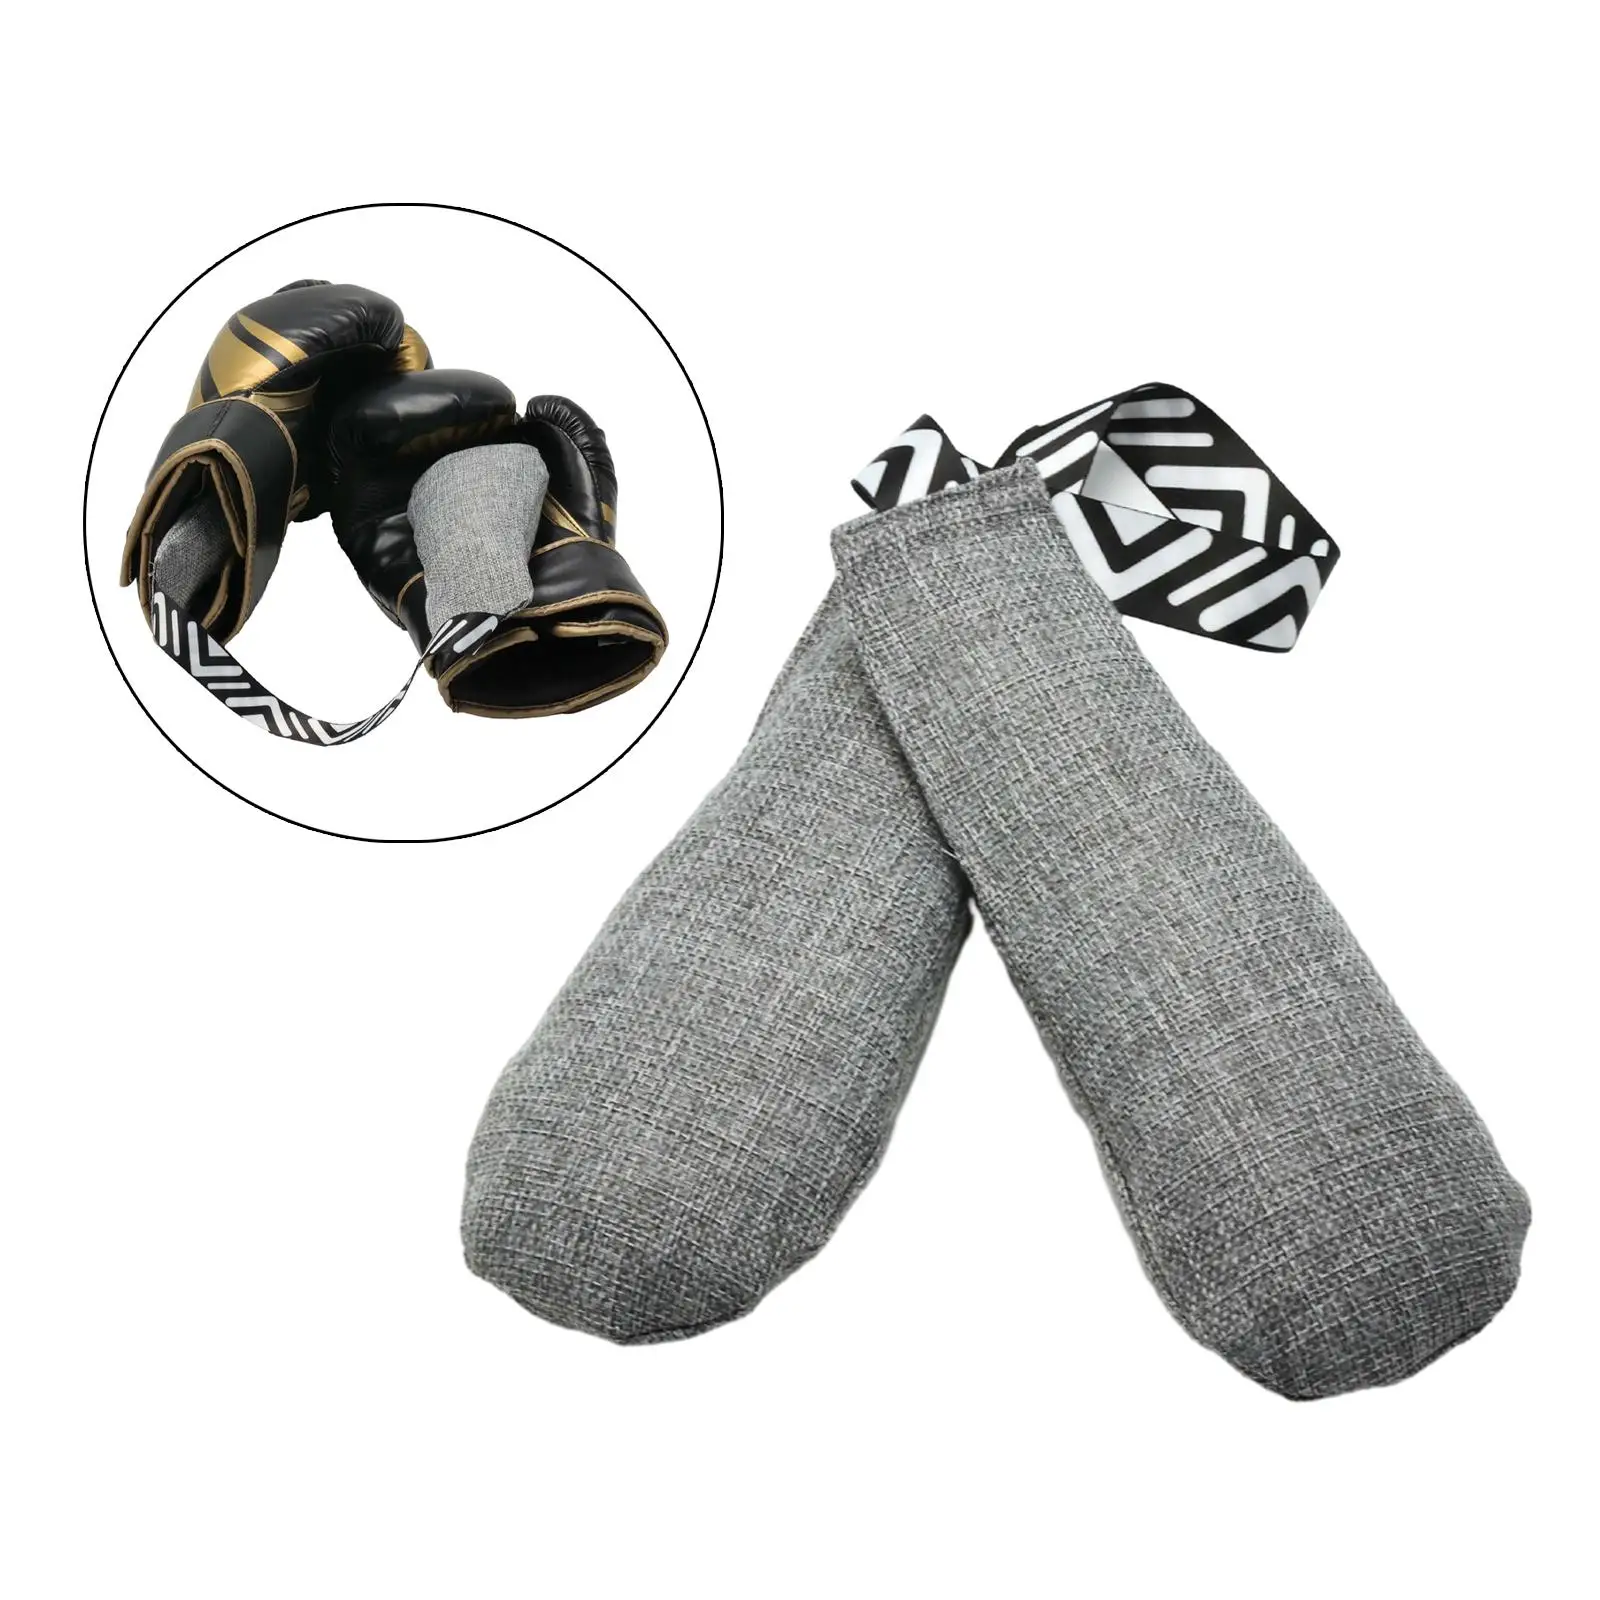 Boxing Gloves Cleaning Cloth Mma Leaves Gloves Fresh Practical Tool Shoes Dryer for All Sports Gloves Ski Boxing Hockey Football